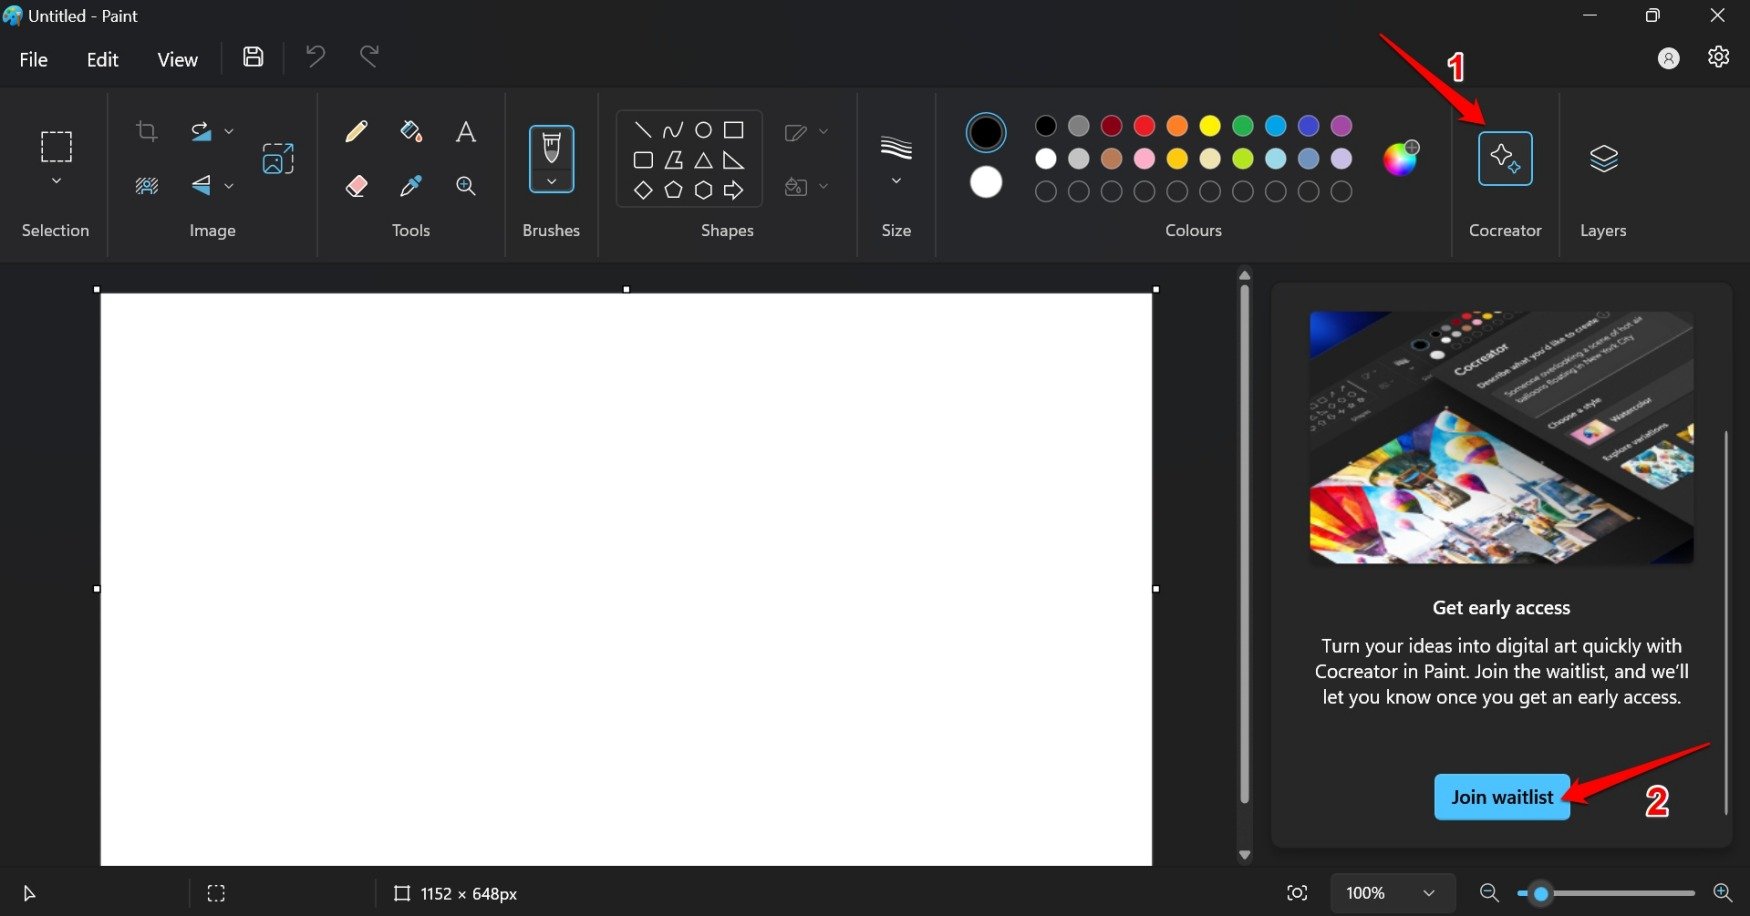 join the MS paint cocreator waitlist